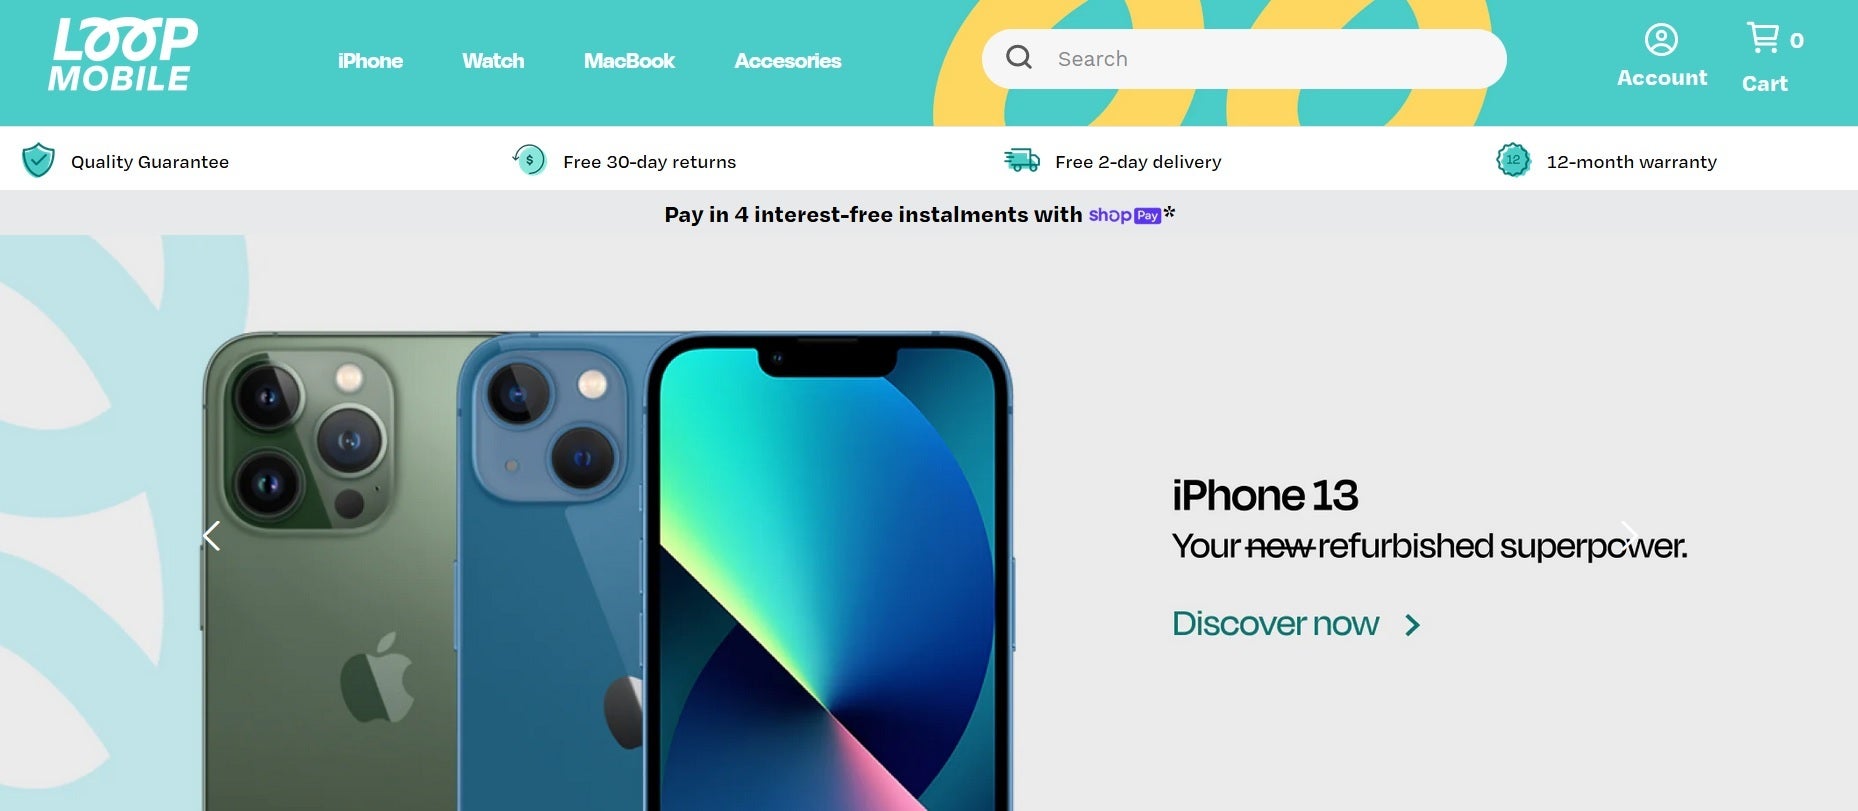 You can buy refurbished iPhone units from Alchemy&#039;s Loop Mobile website - This is how a used iPhone unit gets a second shot at life